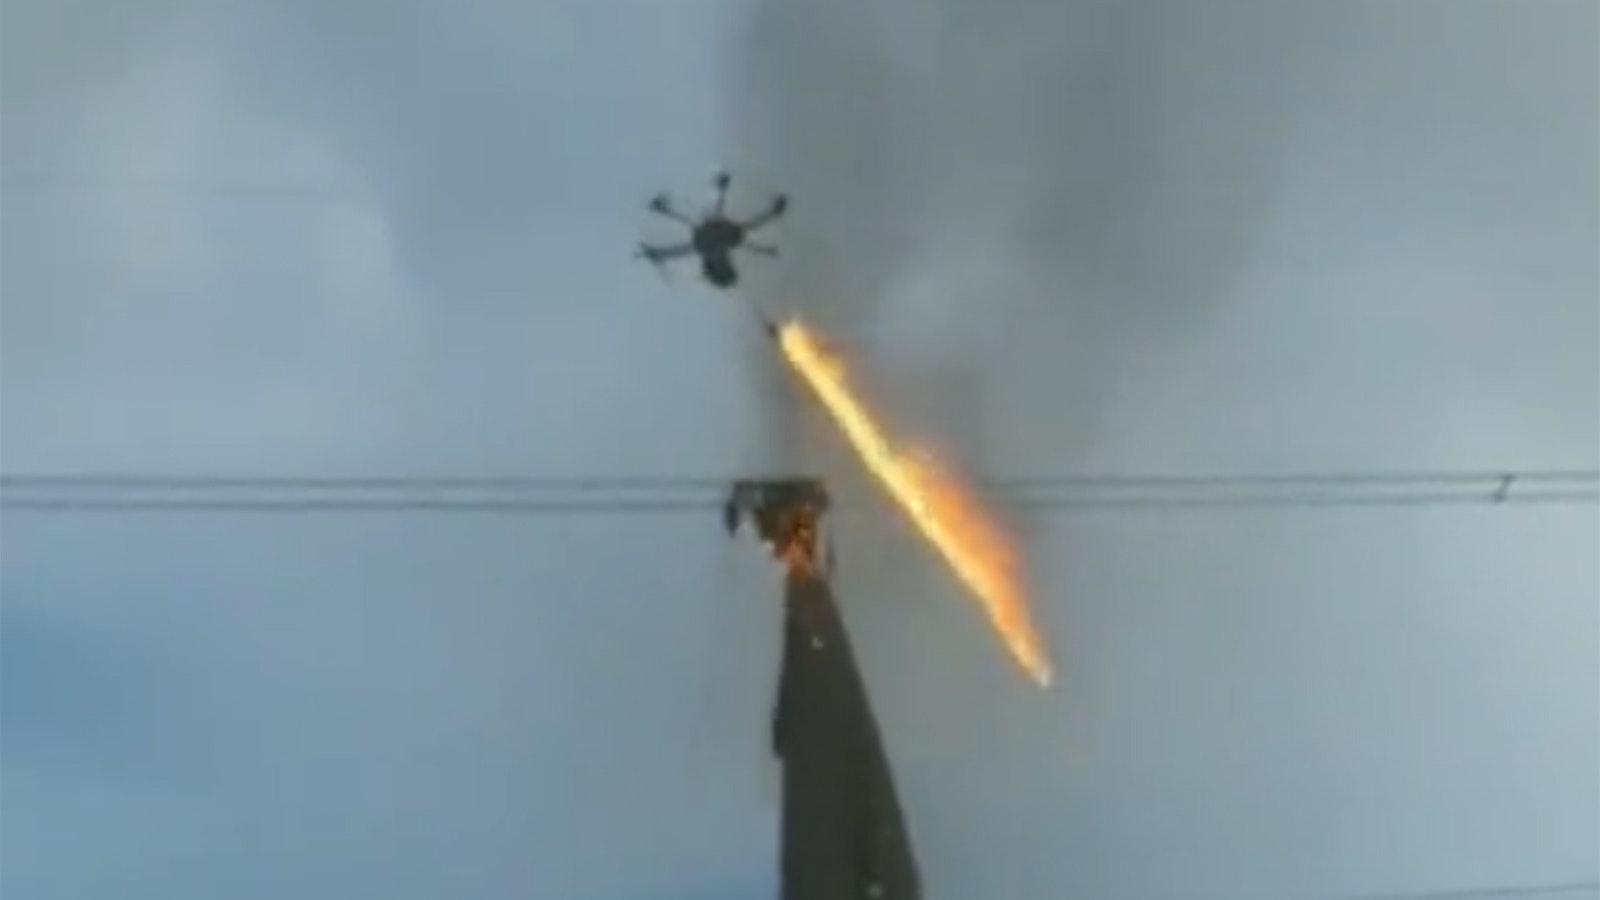 In some areas, drones equipped with flamethrowers are used to help clear debris off power lines.